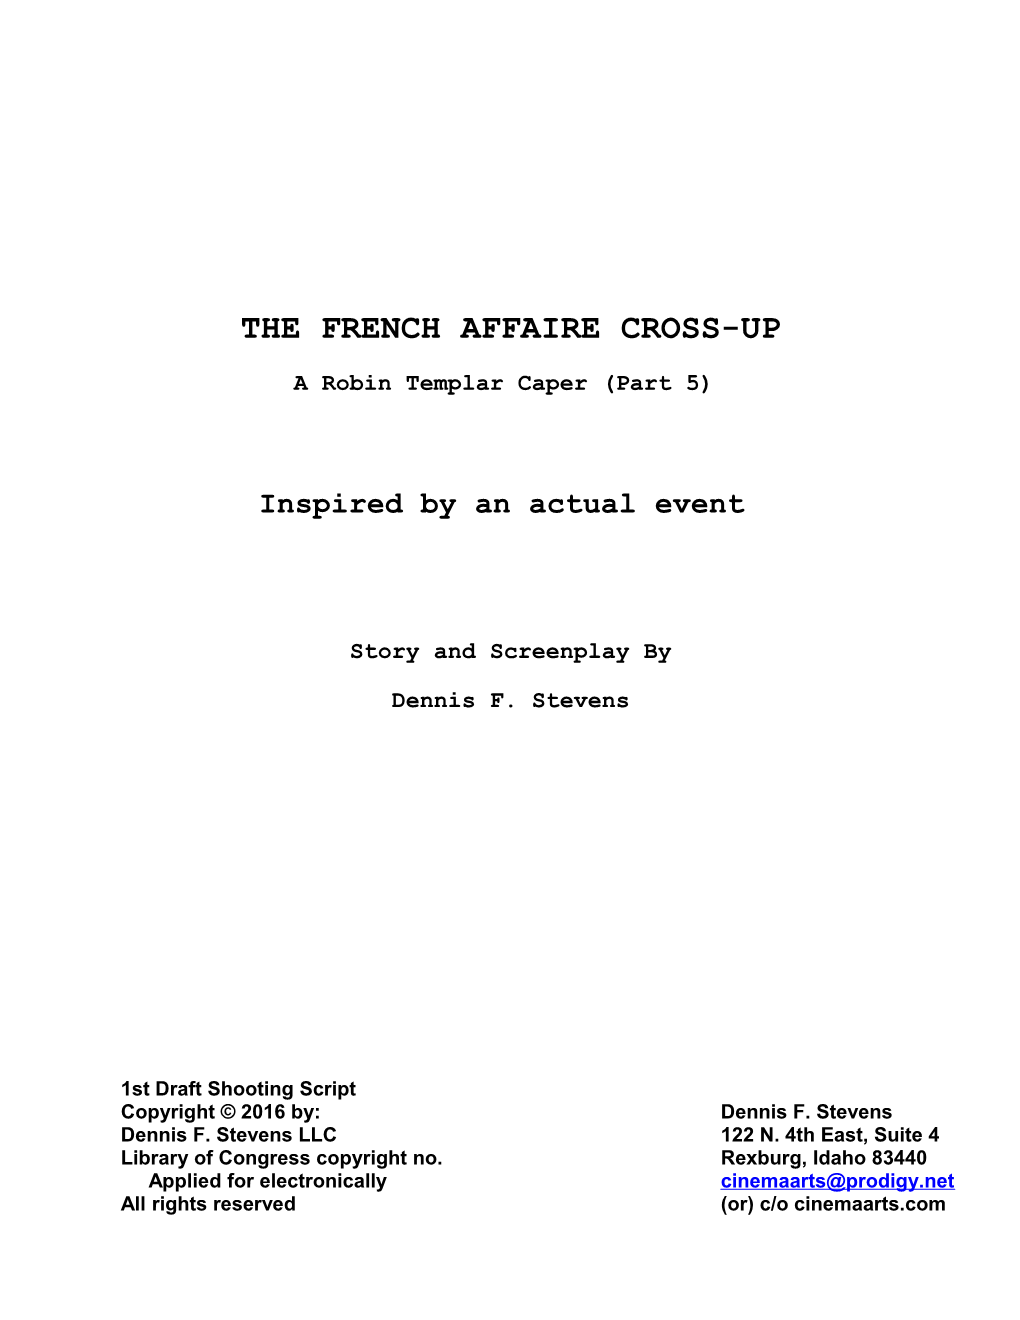 The French Affaire Cross-Up